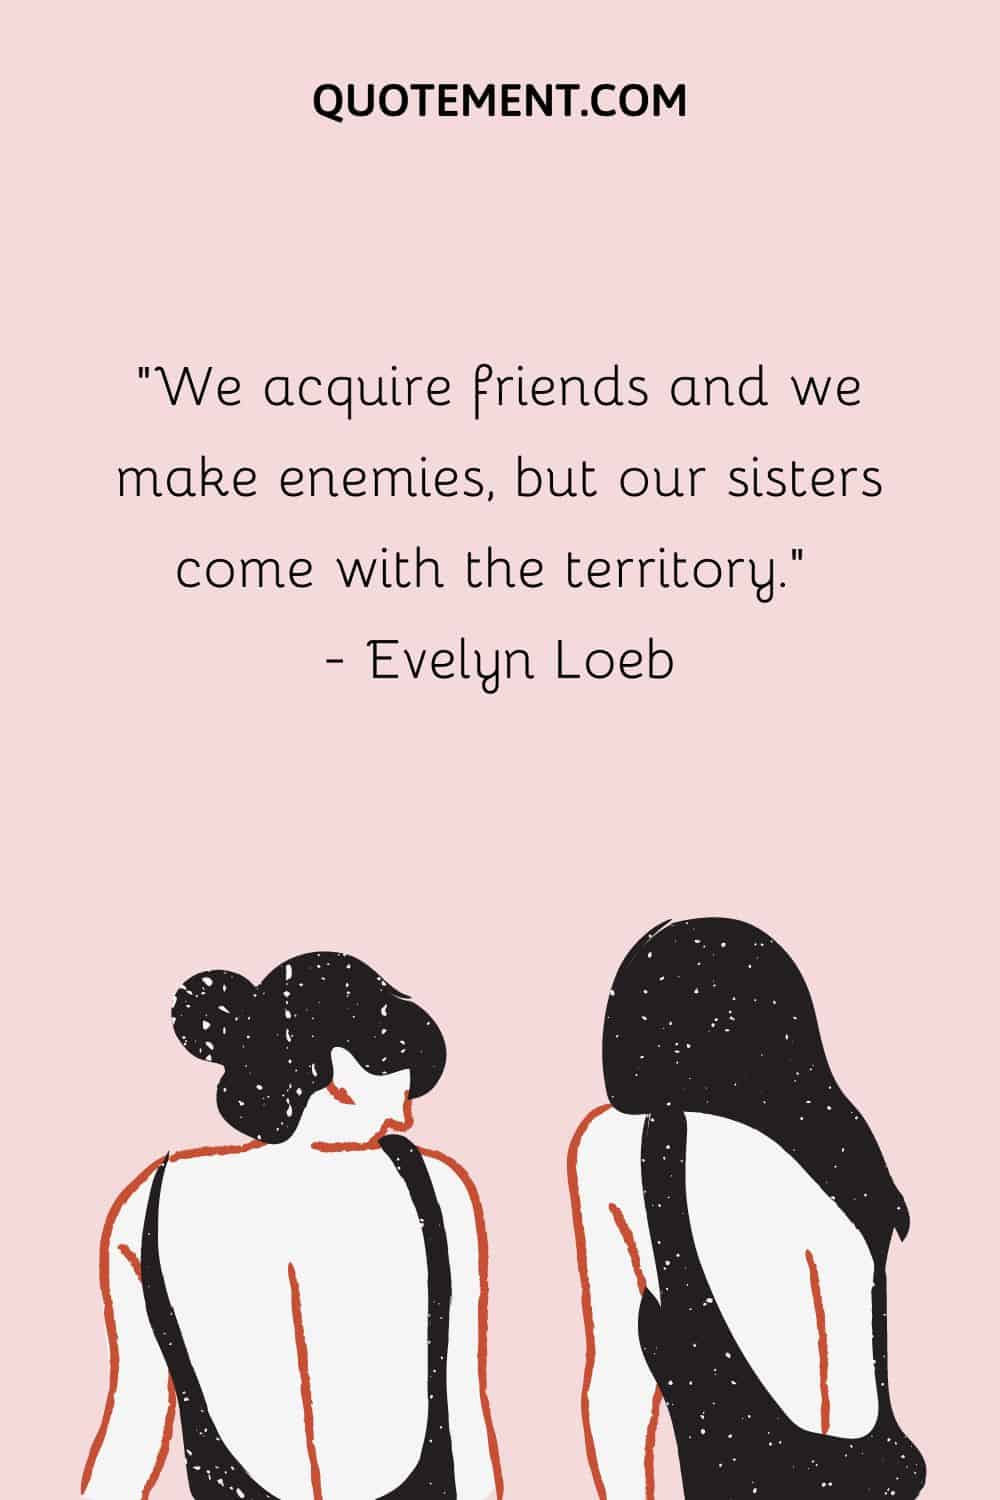 We acquire friends and we make enemies, but our sisters come with the territory